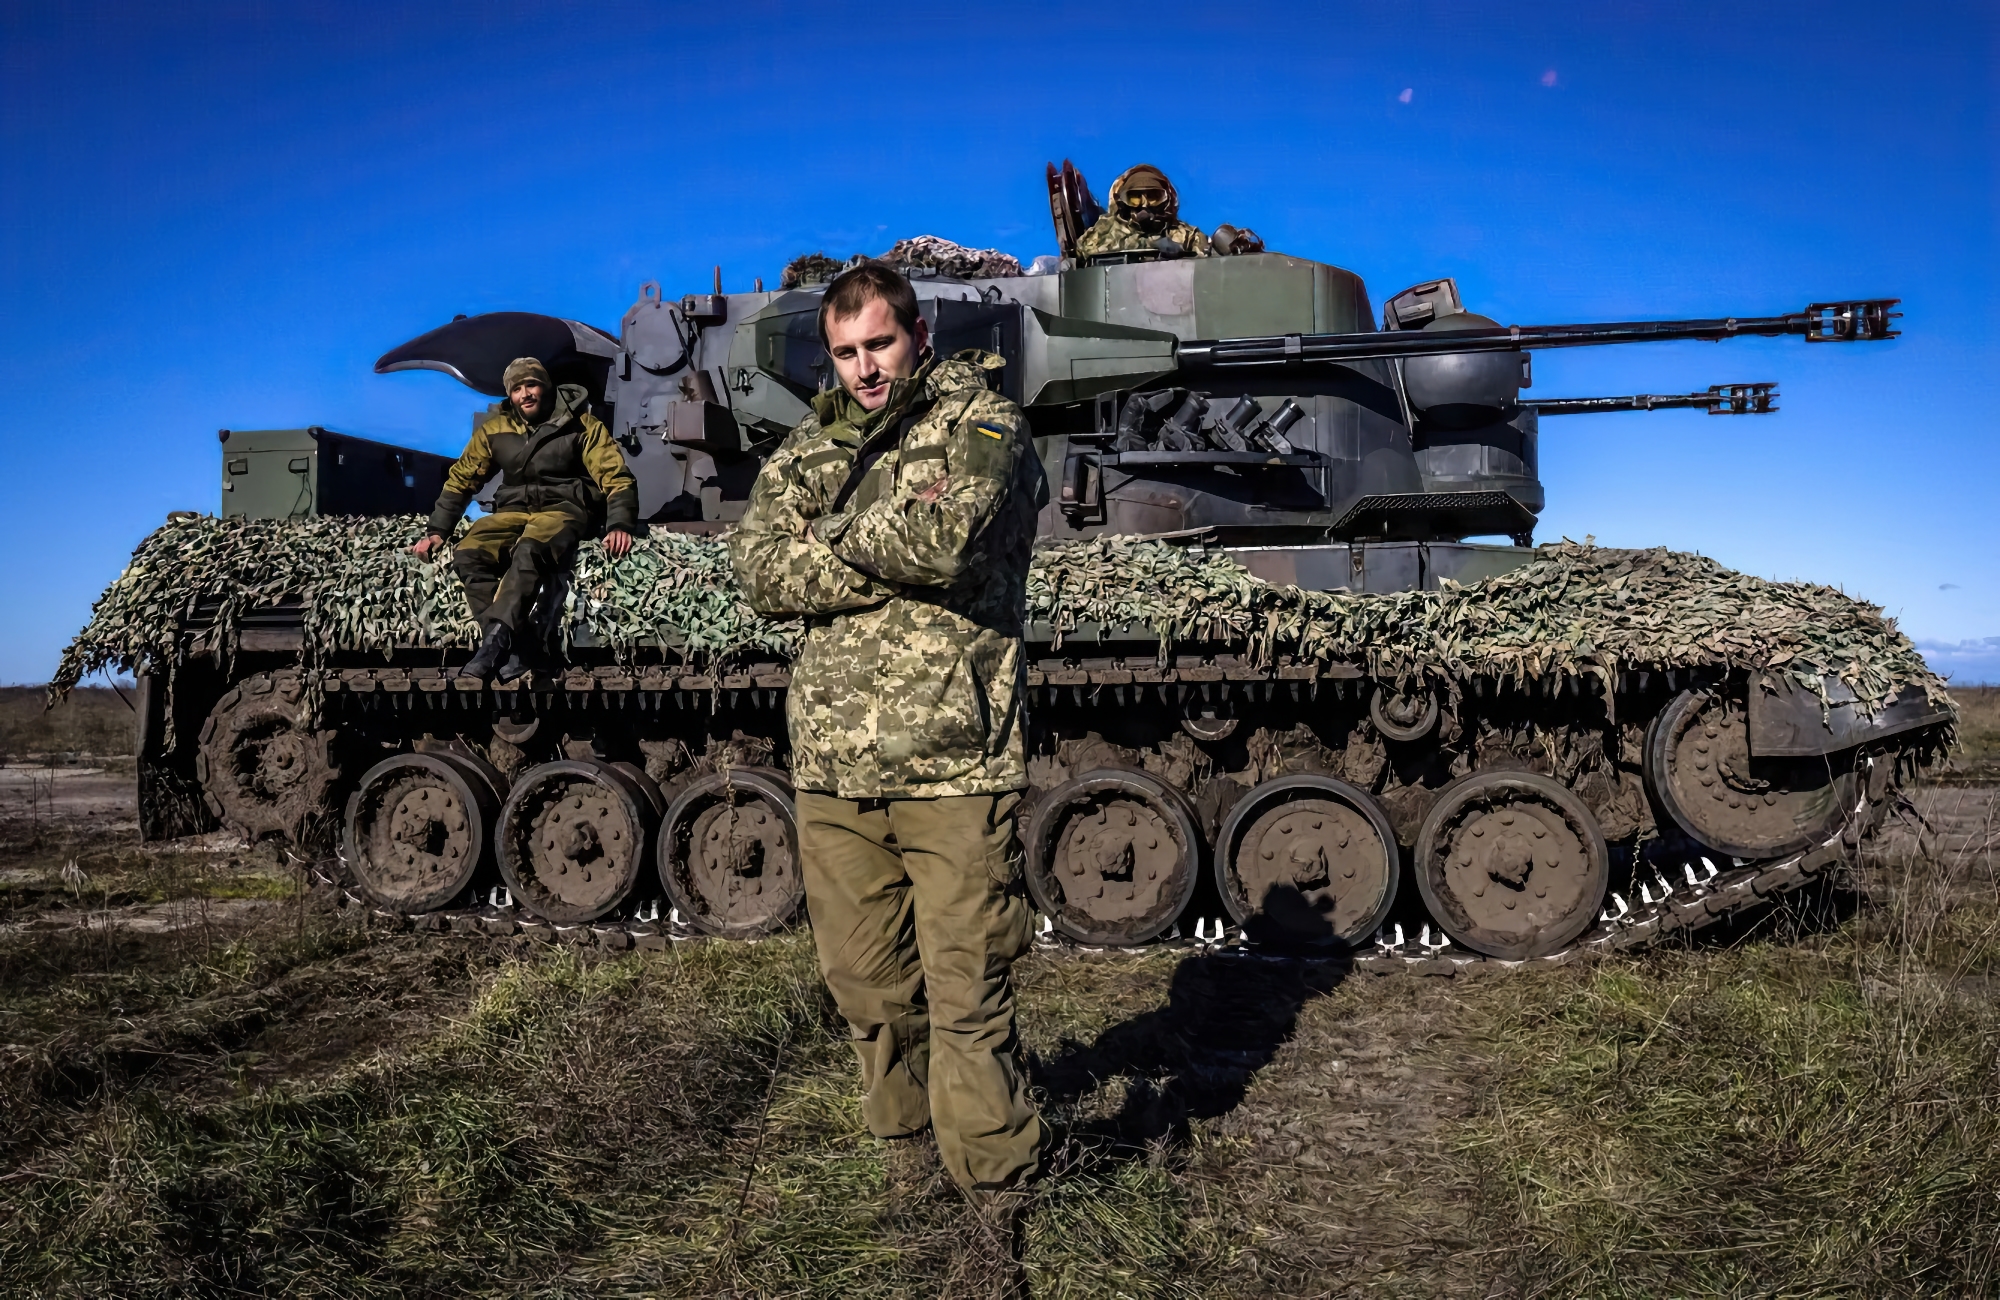 Ukrainian Armed Forces receive additional Gepard anti-aircraft tanks from Germany, with 34 in service in Ukraine